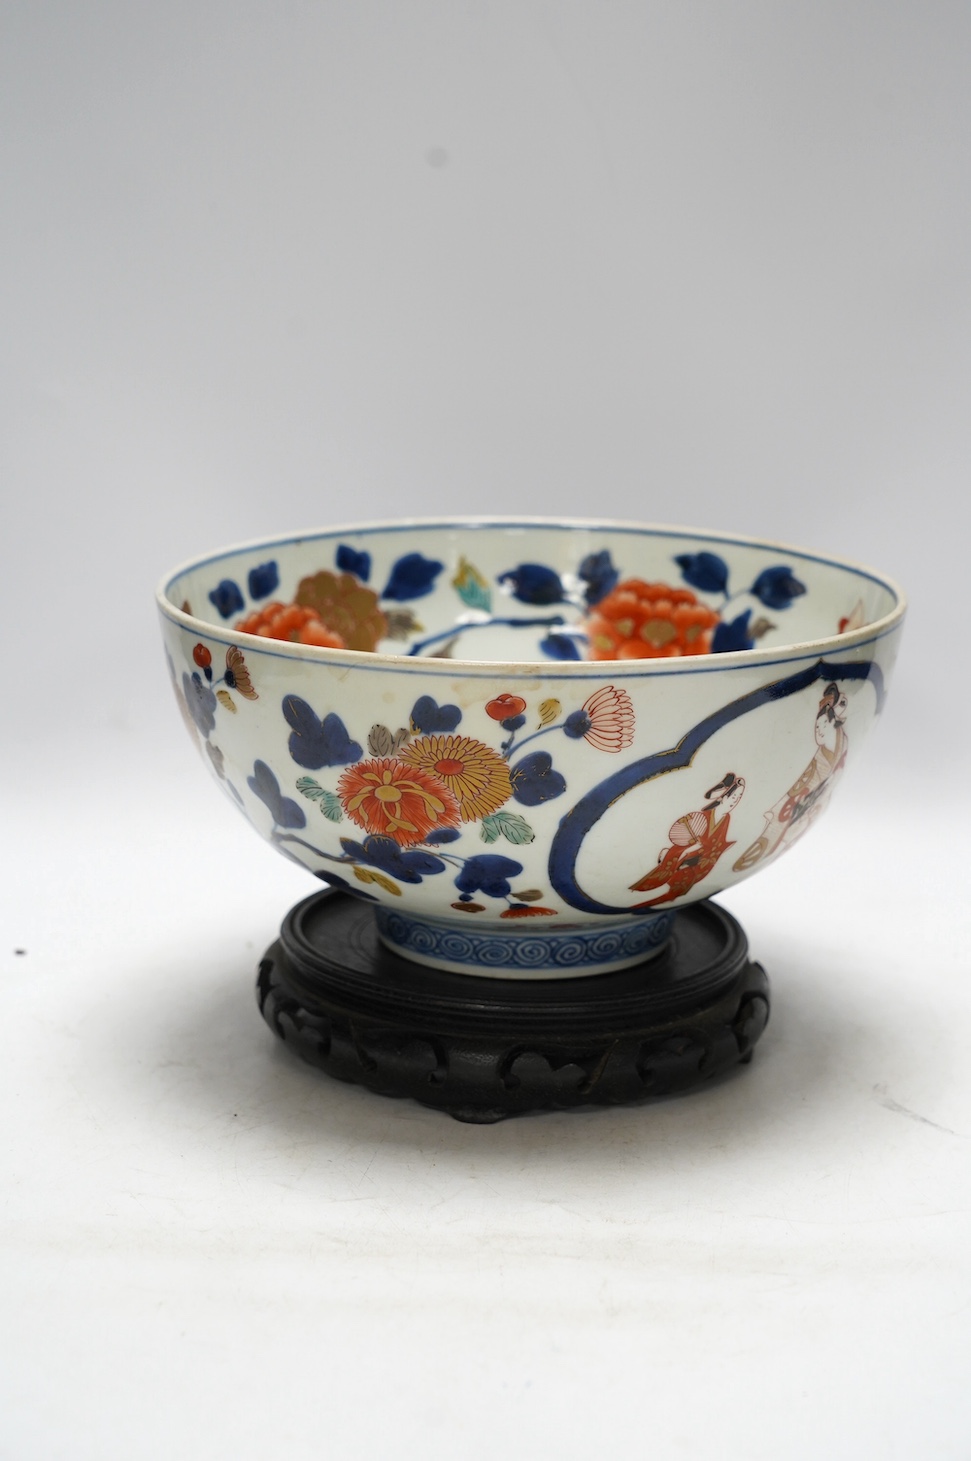 A Japanese Arita polychrome bowl, c.1700, diameter 24.5cm, height 12.5cm, on a carved hardwood stand. Condition - large overglazed open firing crack to foot, otherwise good